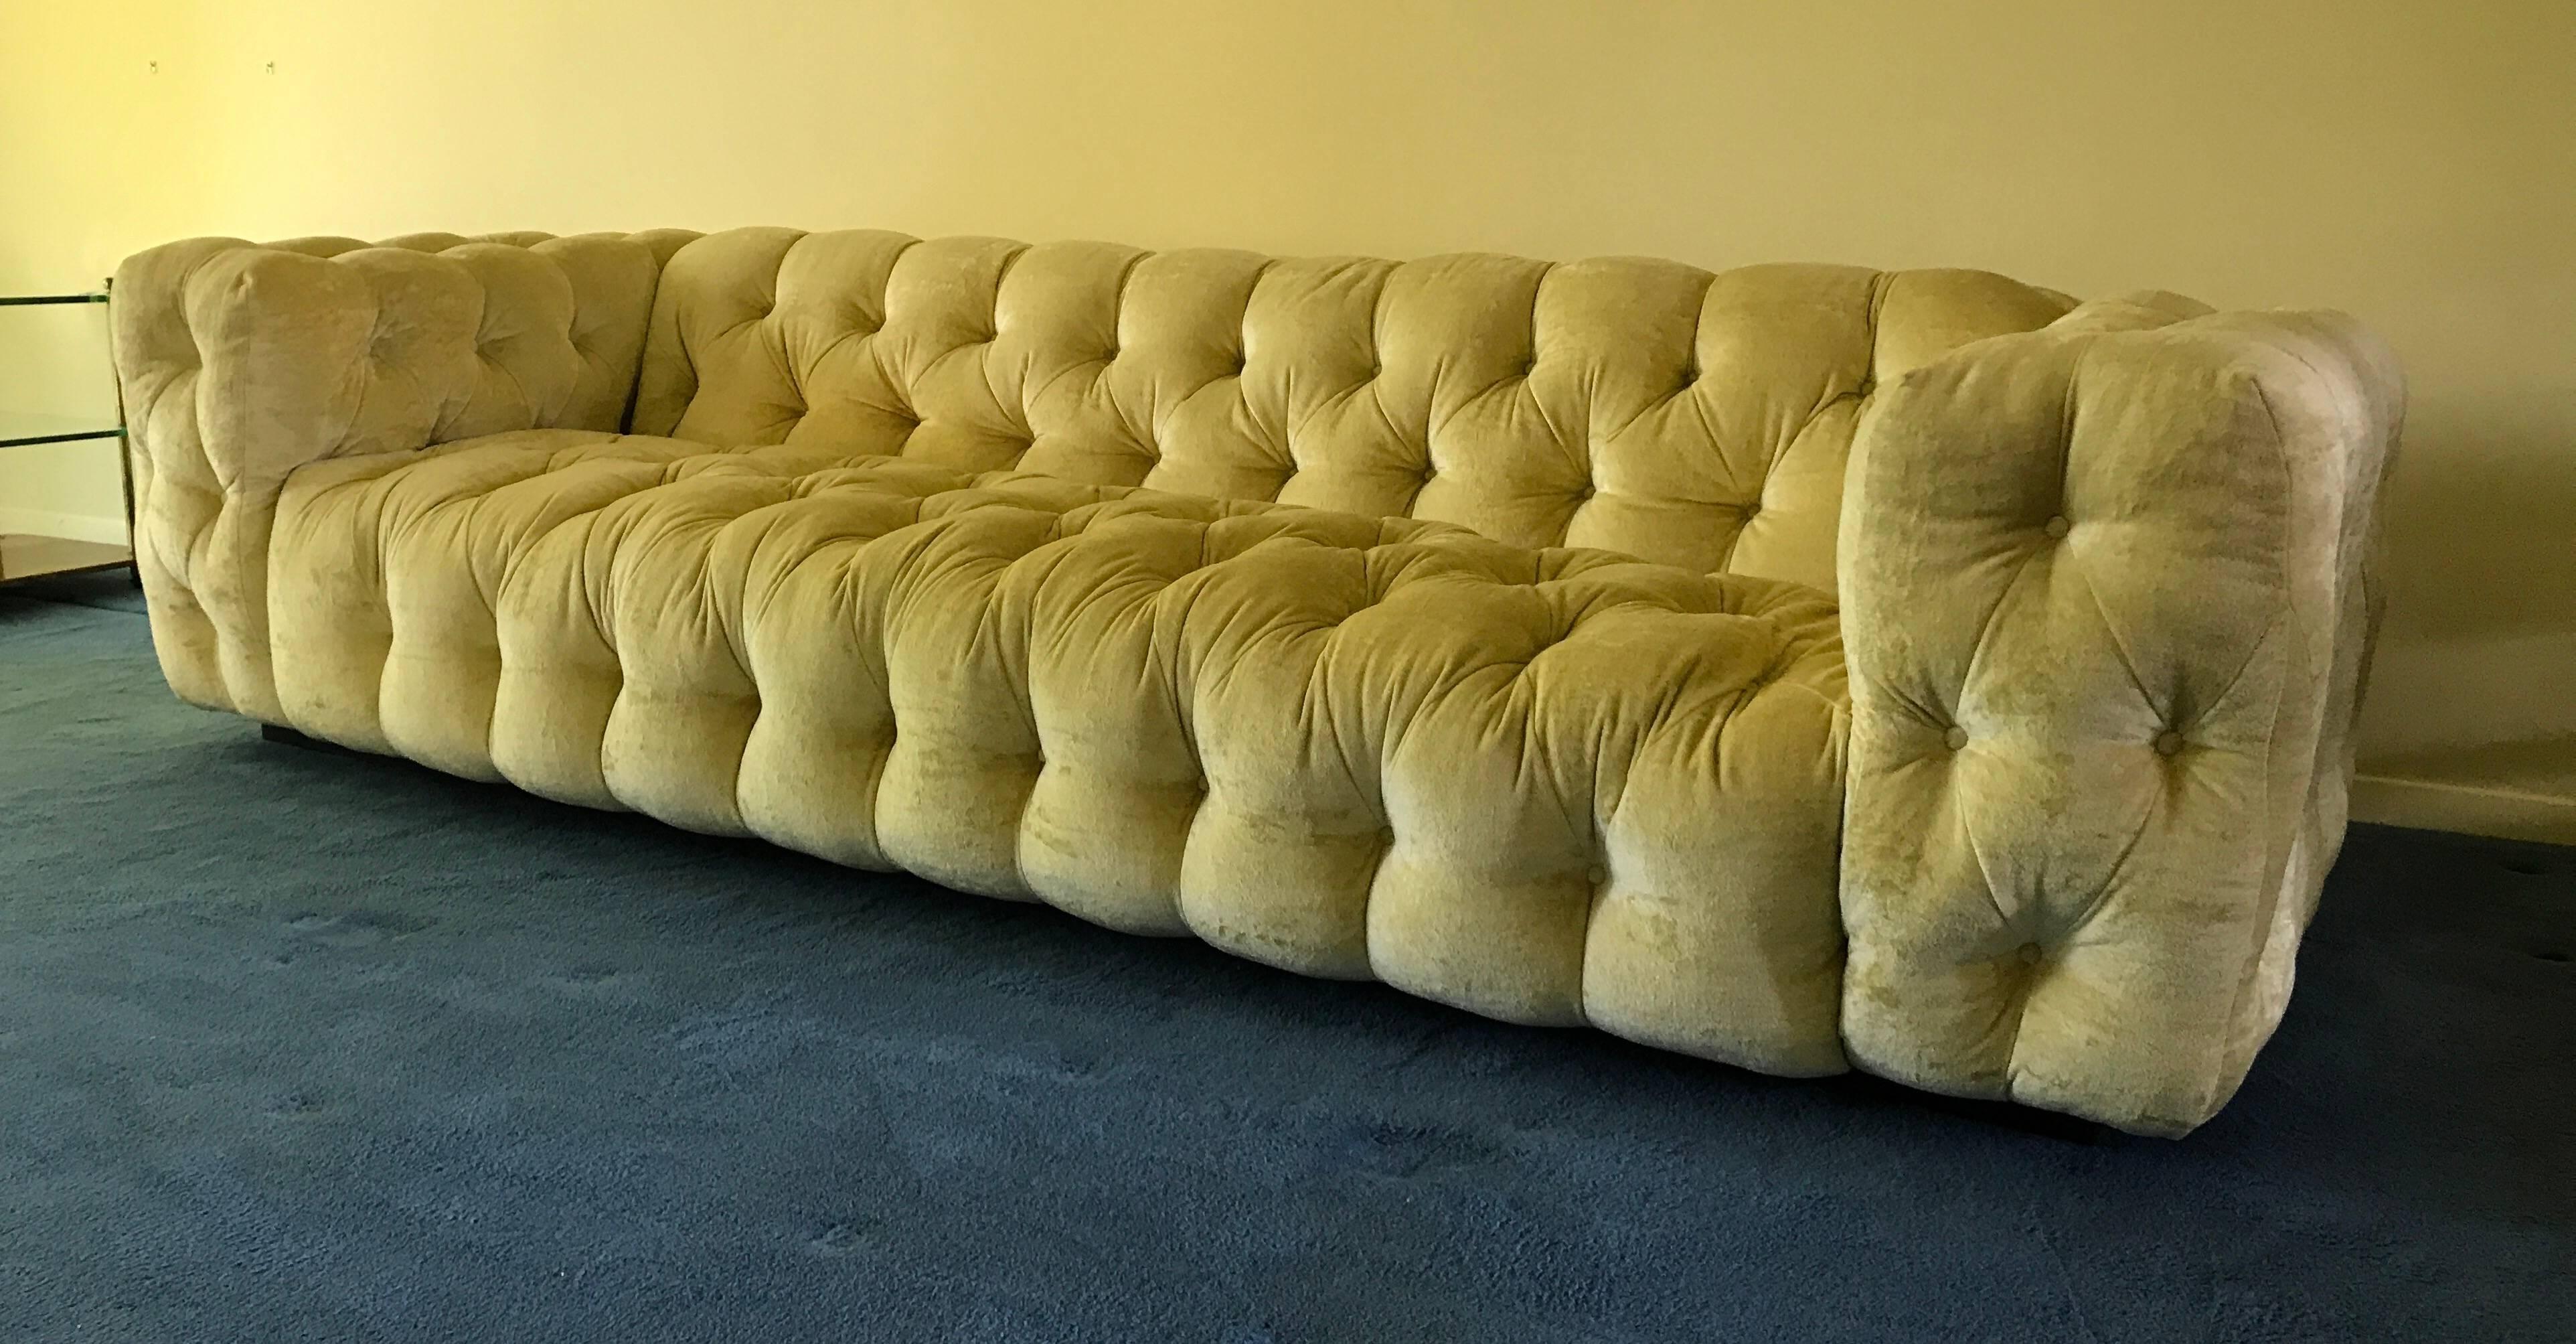 Elusive velvet button tufted sofa designed by Milo Baughman for Thayer Coggin. Stunning Pale yellow velvet upholstery, fully tufted arms, sides and even the back, so that the sofa can be positioned and its elegance viewed from any angle, Close up